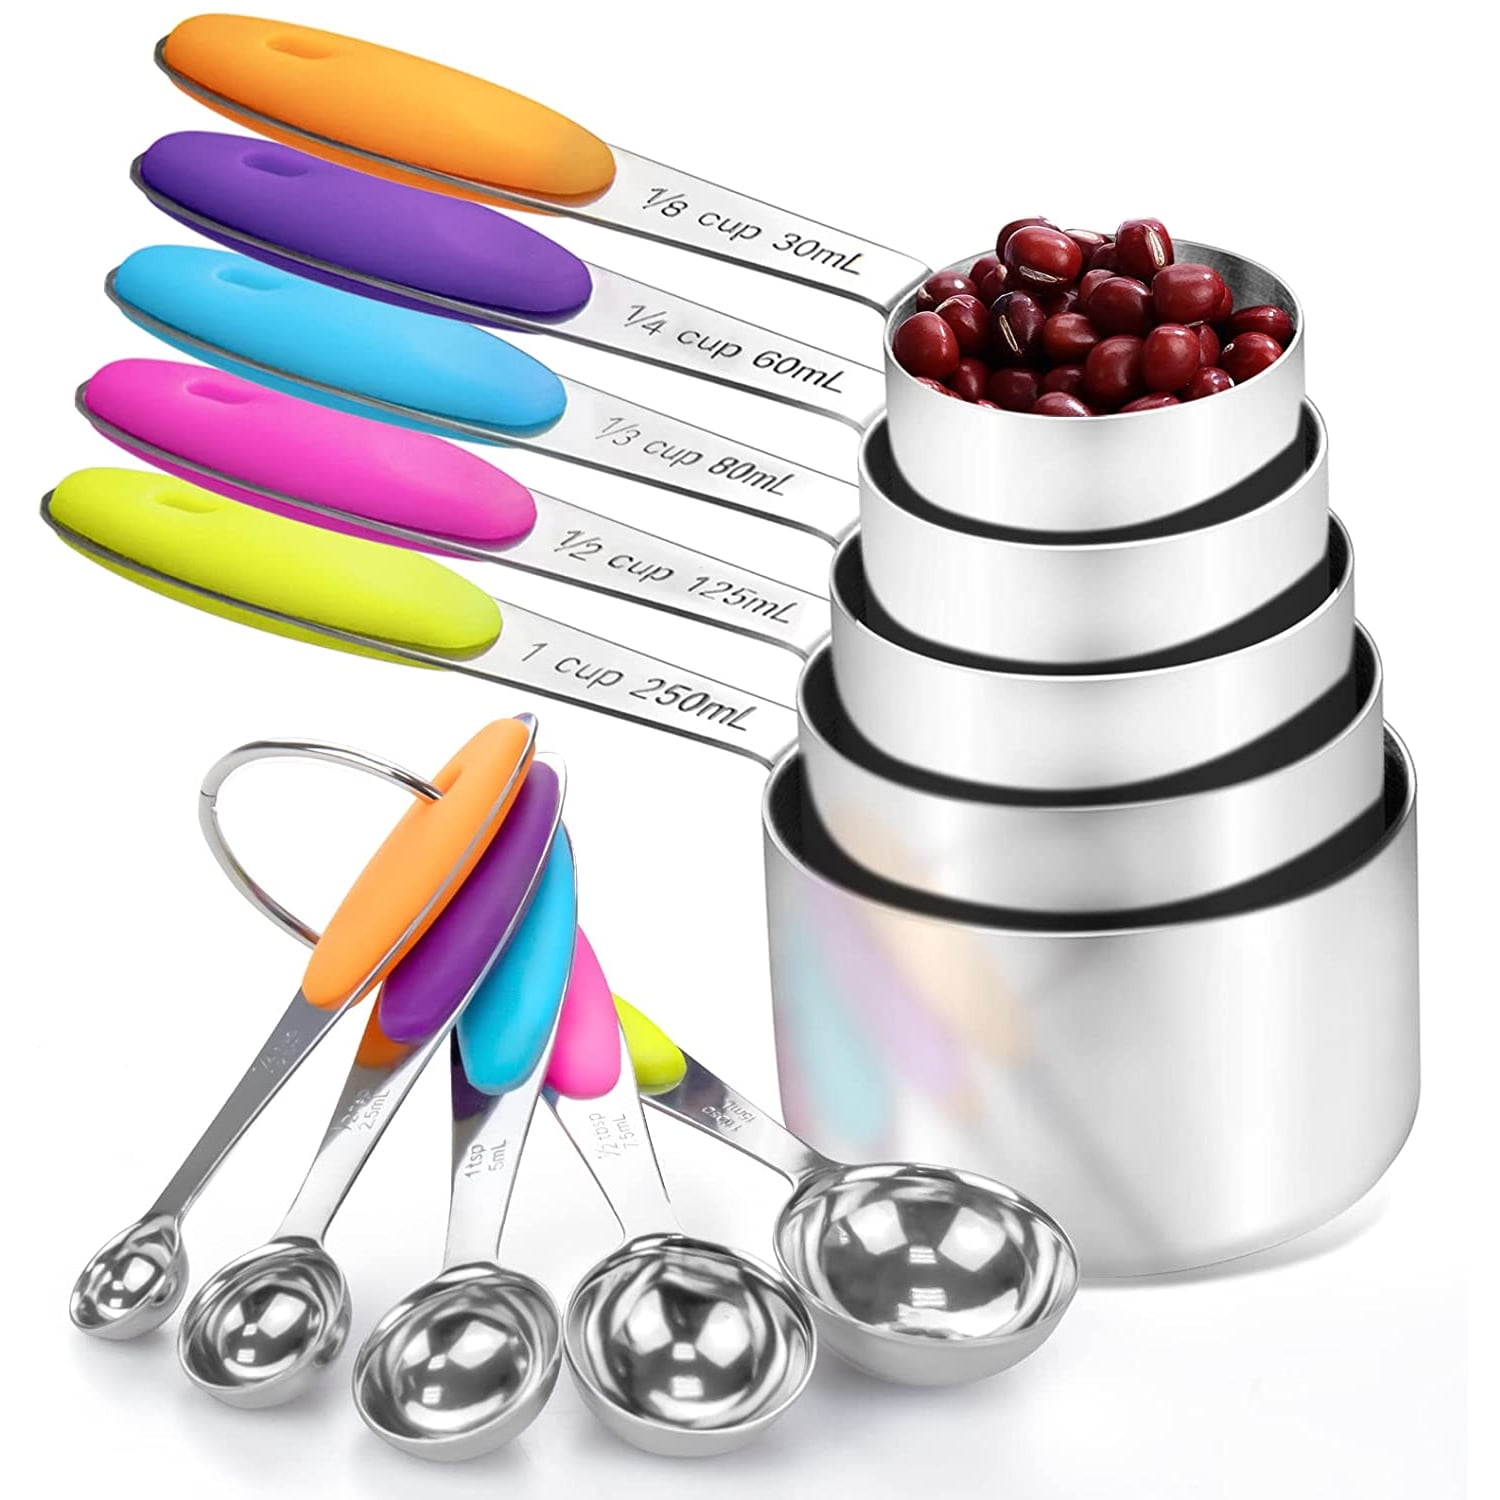 Farberware Professional Stainless Steel Soft Measuring, Set Of 5, Multicolor